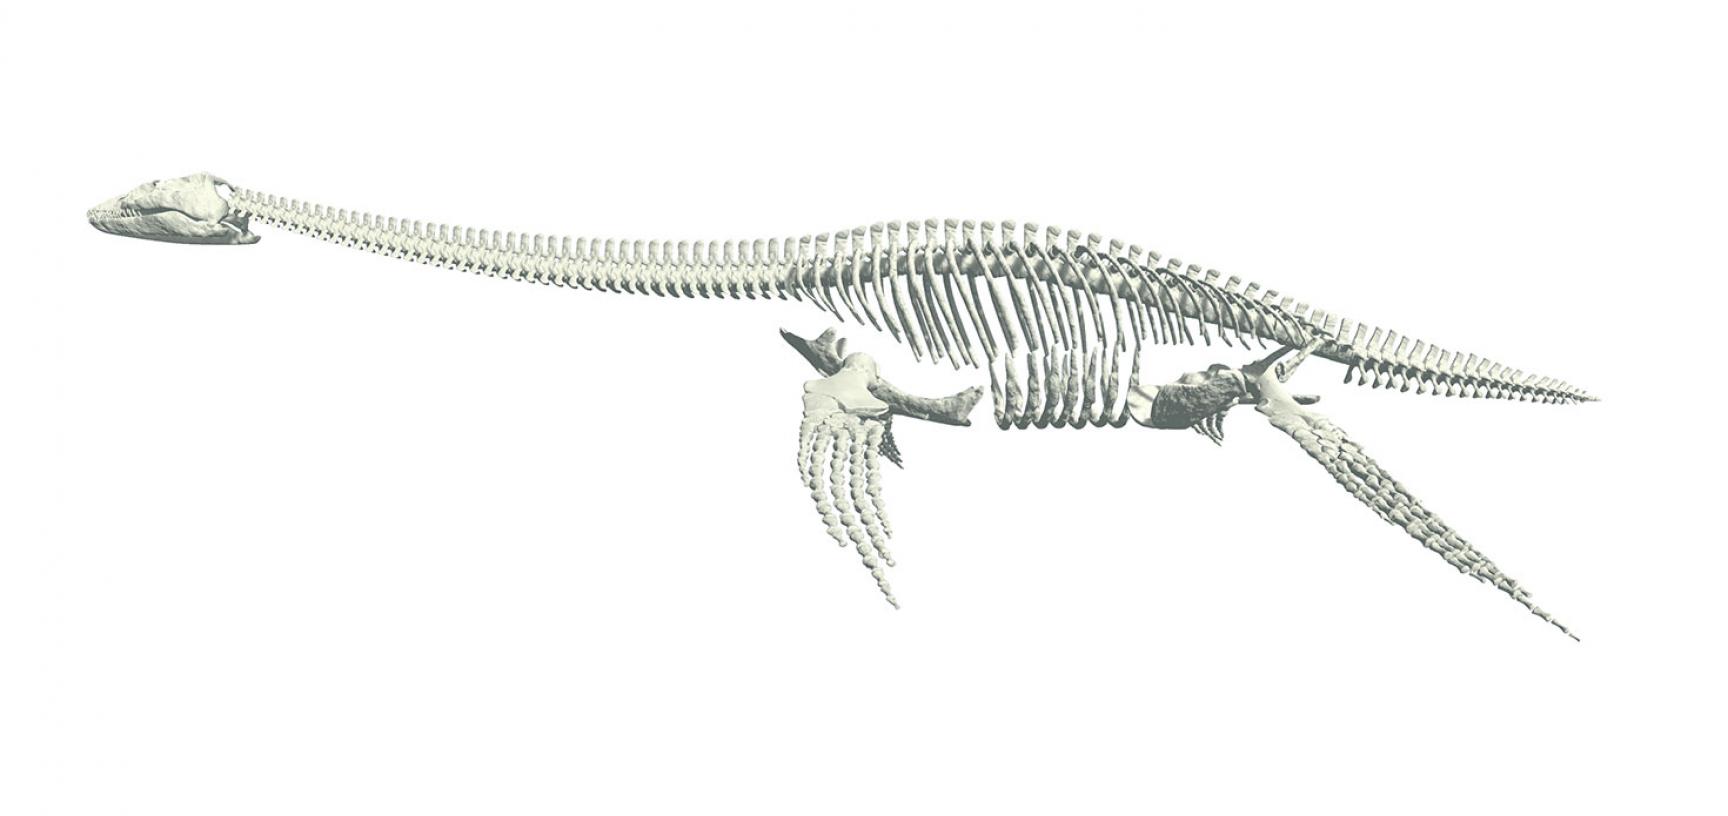 Long necked skeleton of a plesiosaur, Oxford University Museum of Natural History